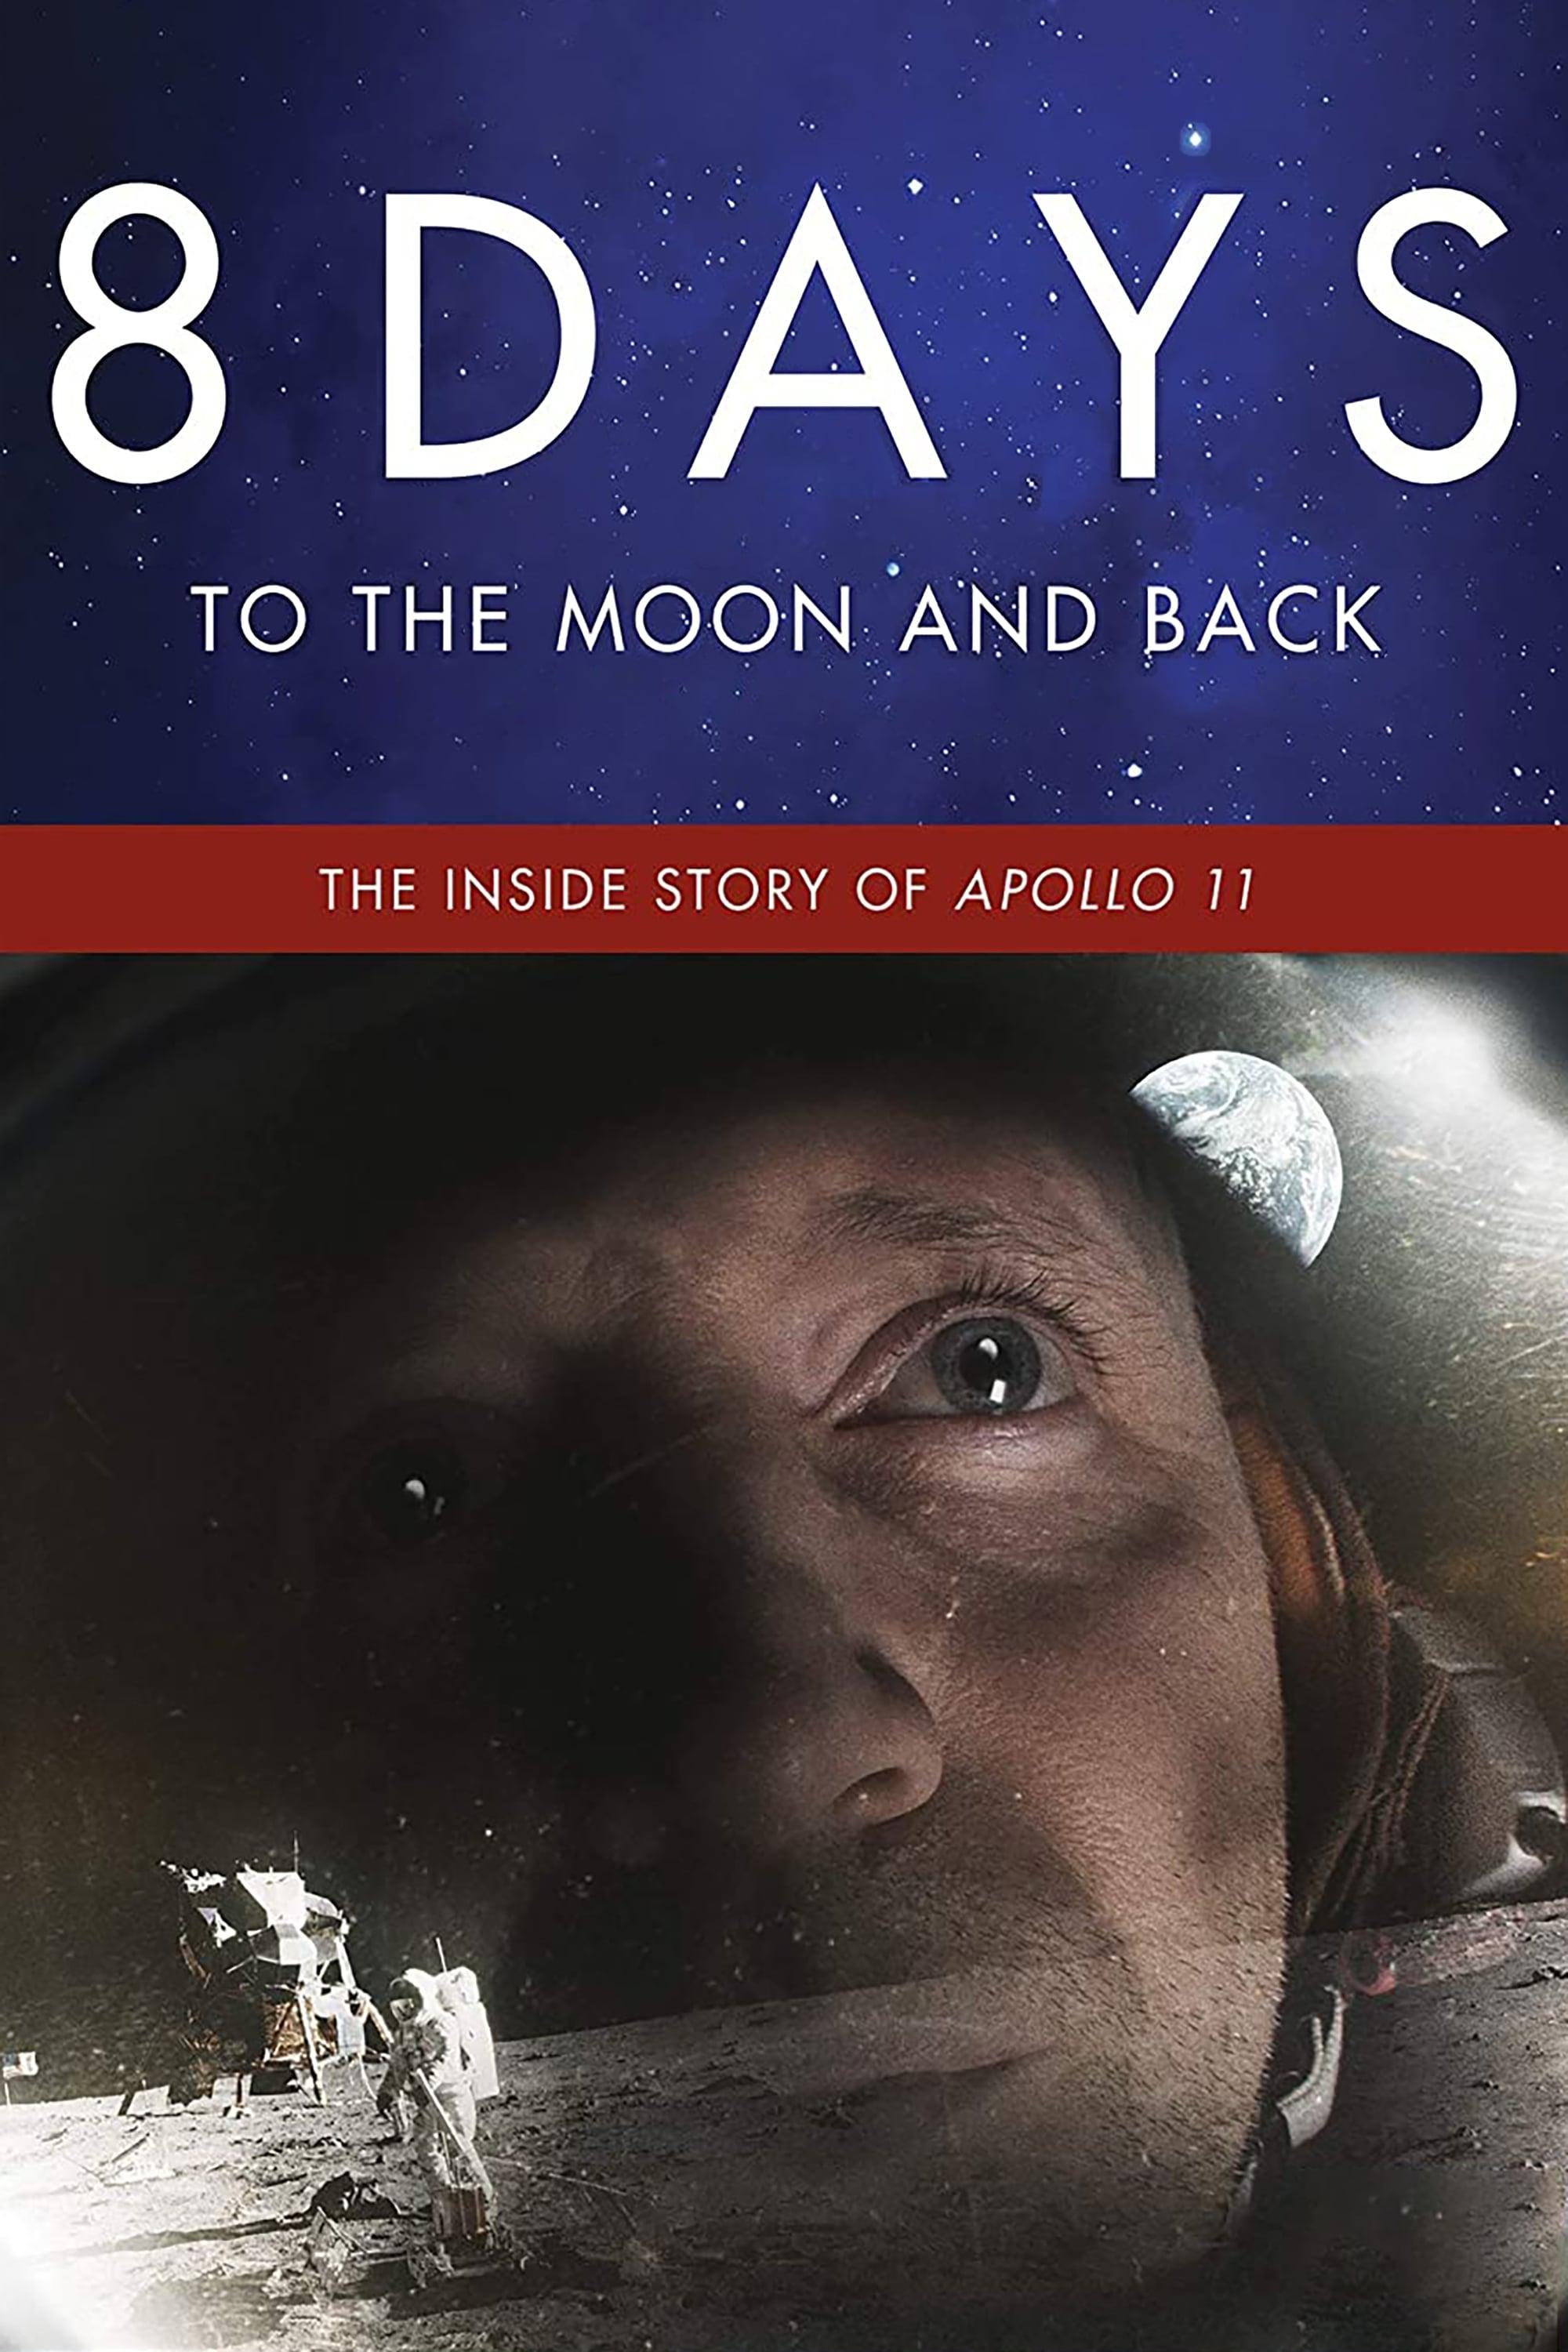 8 Days: To the Moon and Back poster